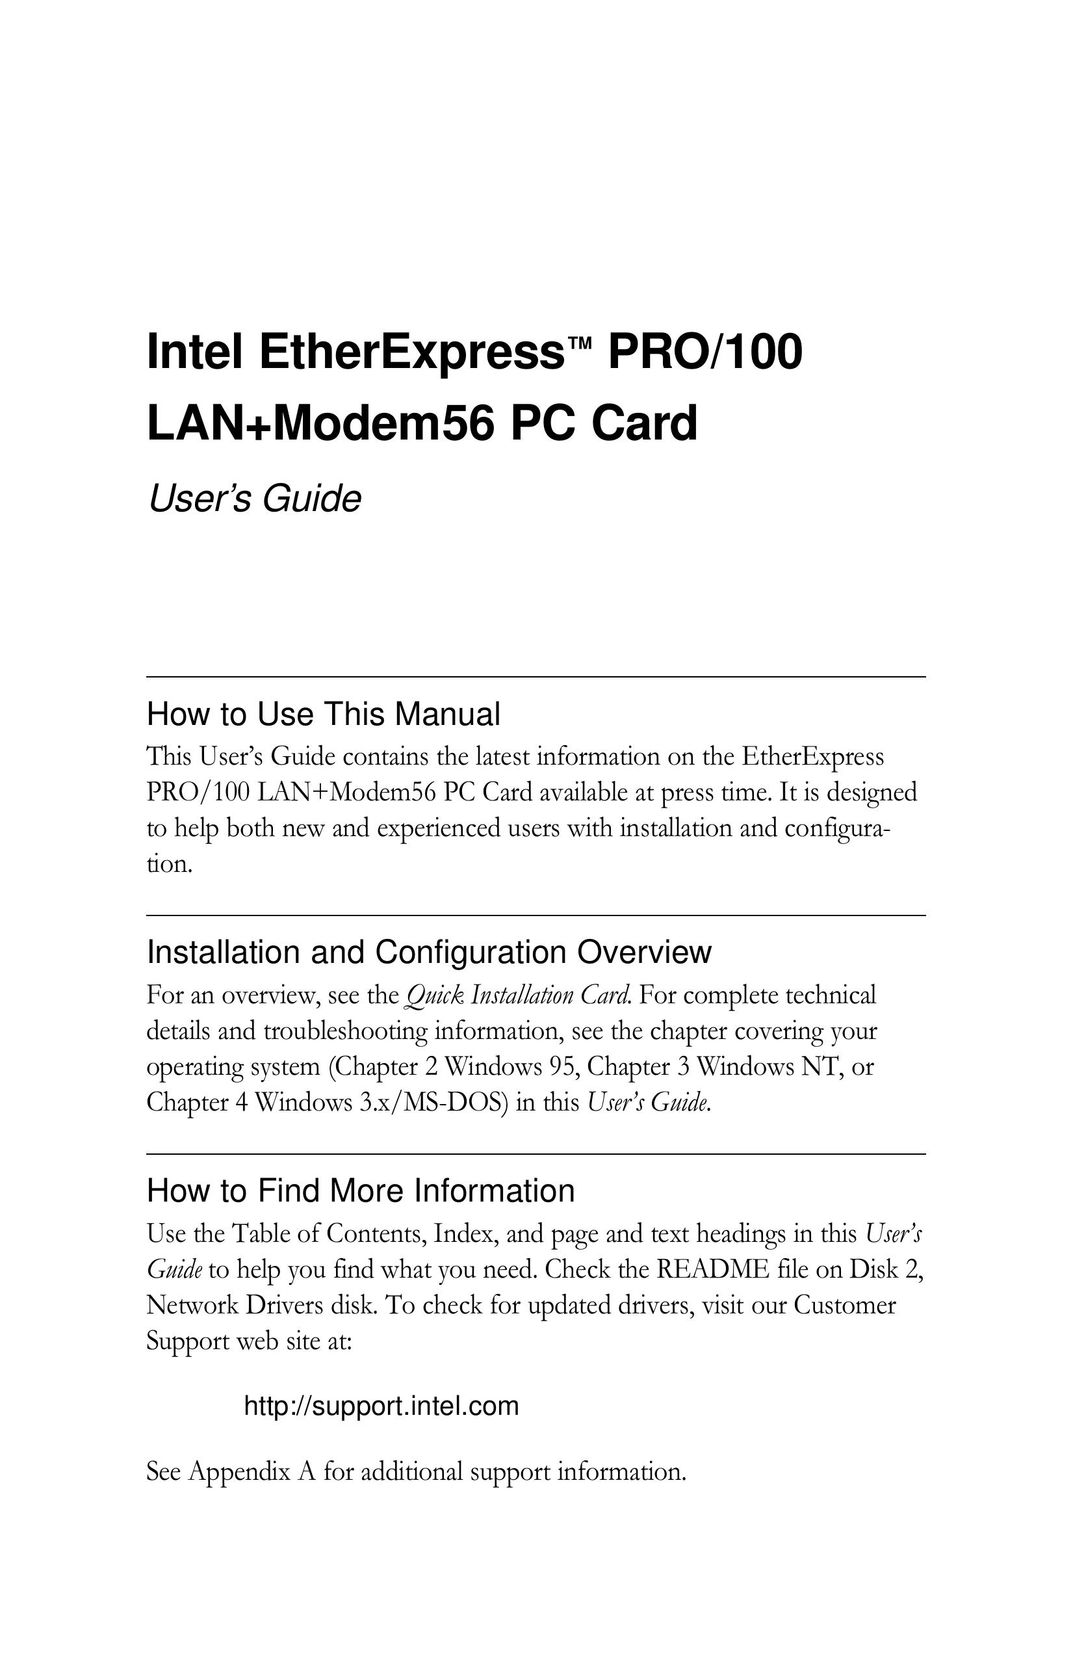 Intel PRO/100 Network Router User Manual